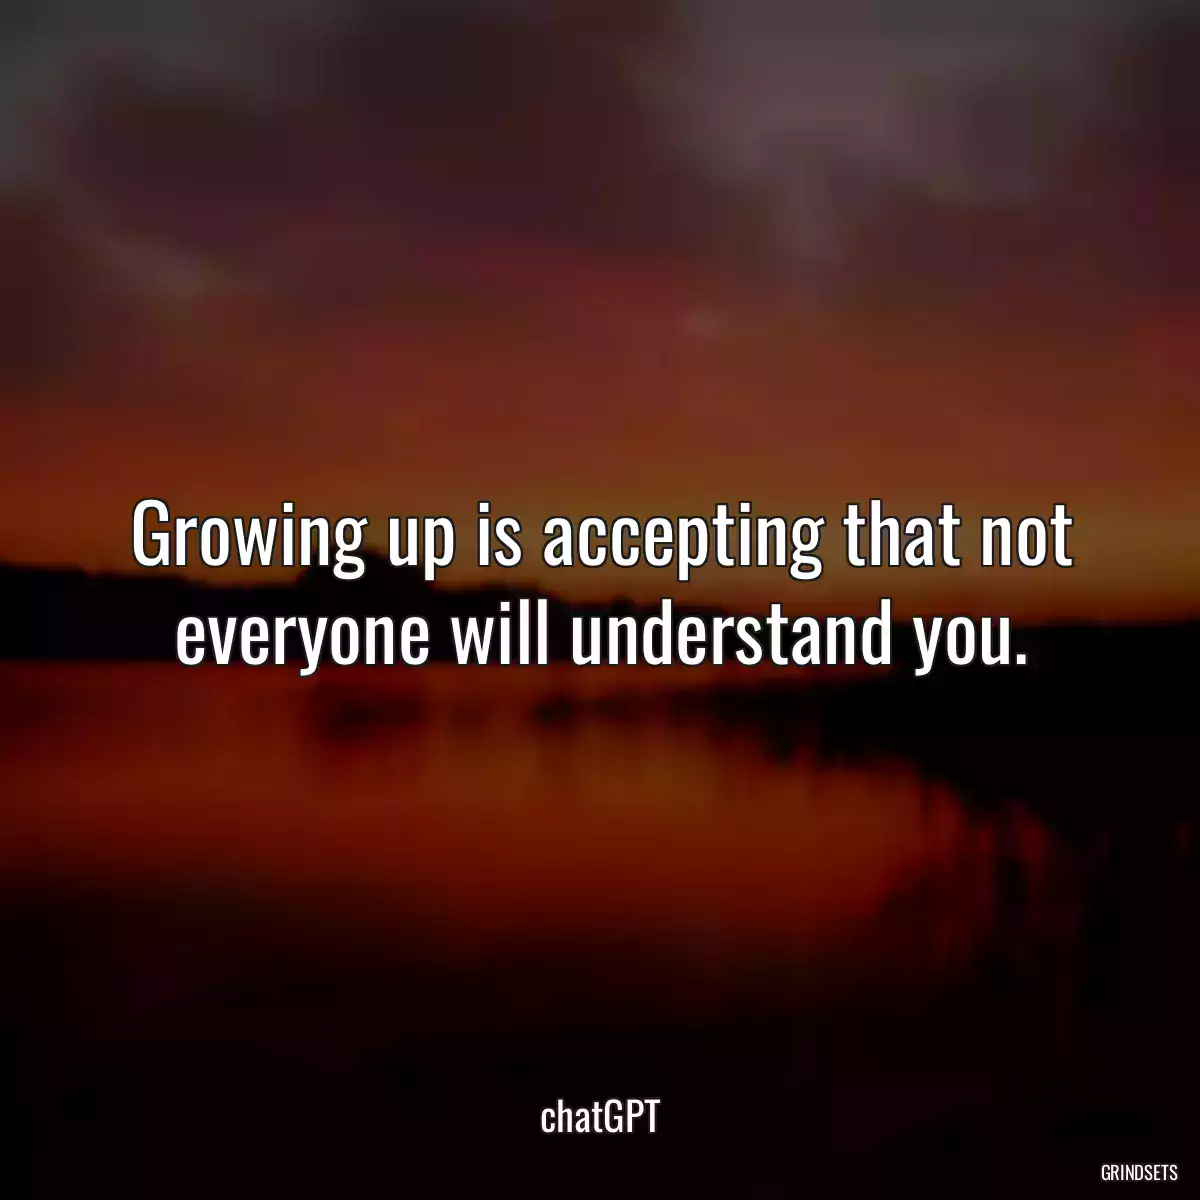 Growing up is accepting that not everyone will understand you.